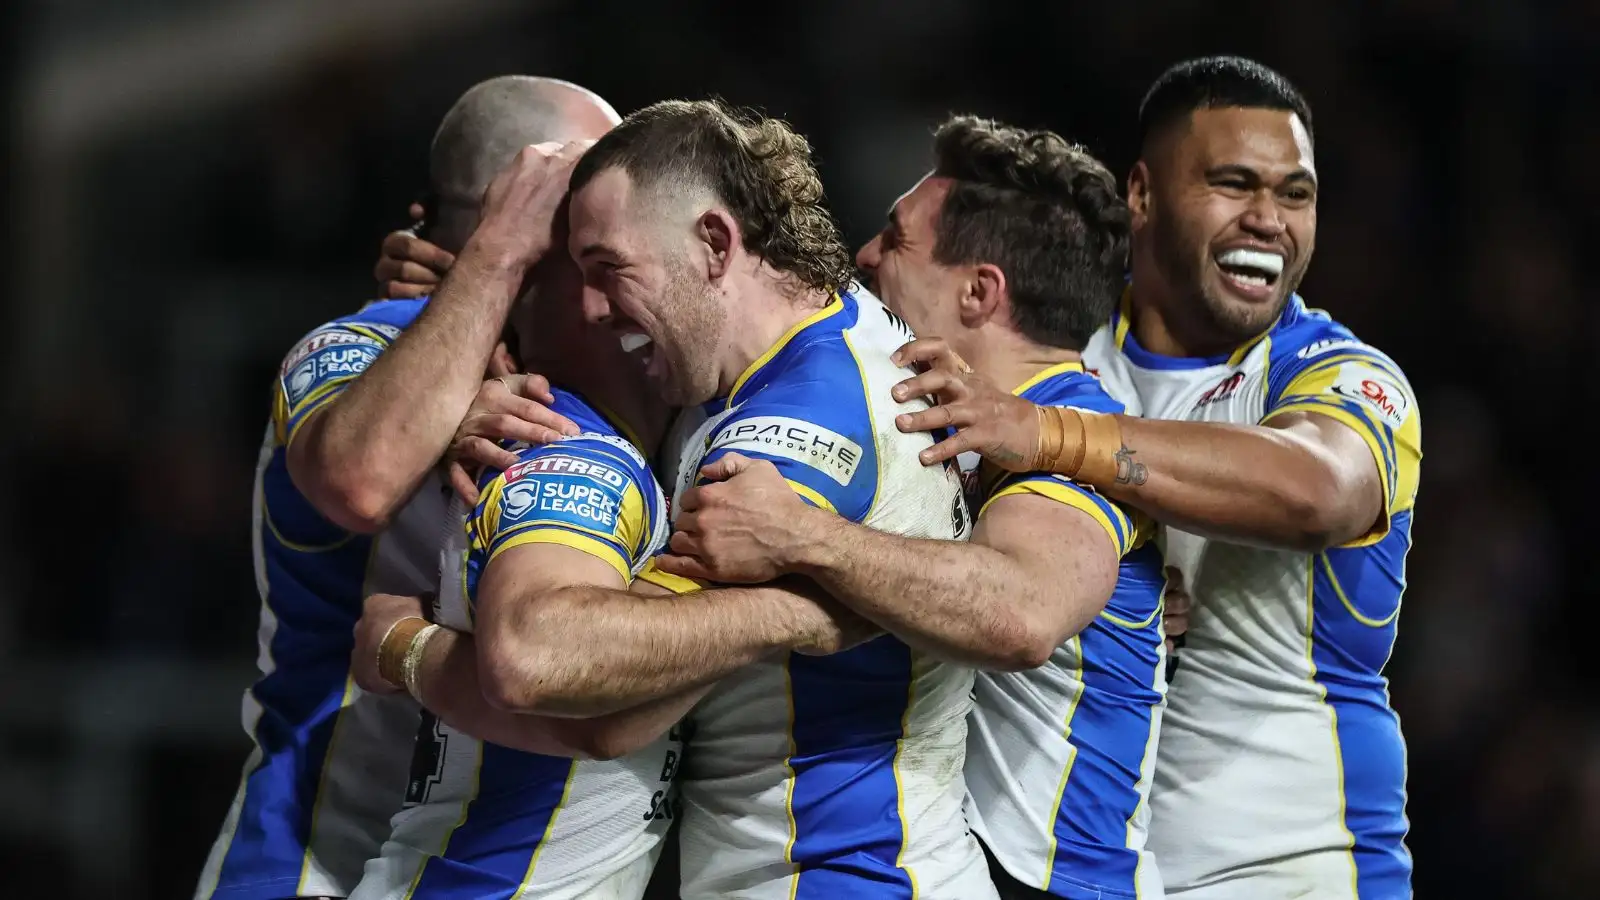 The Debrief: Leeds back to winning ways, Hull FC improve, Rhinos youngster shines on debut